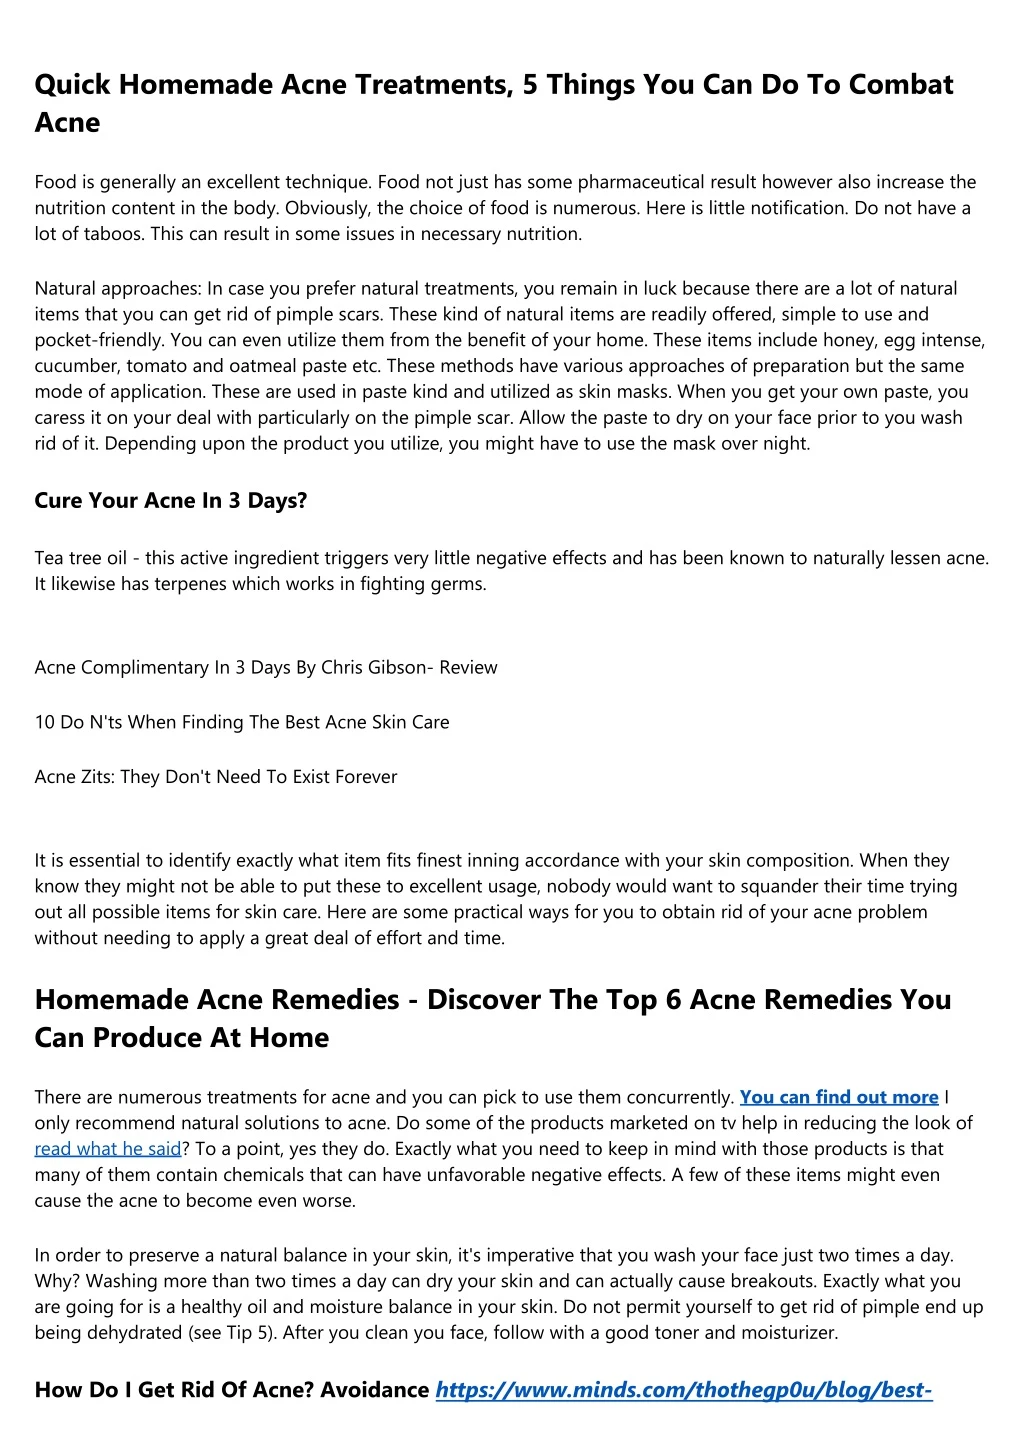 quick homemade acne treatments 5 things